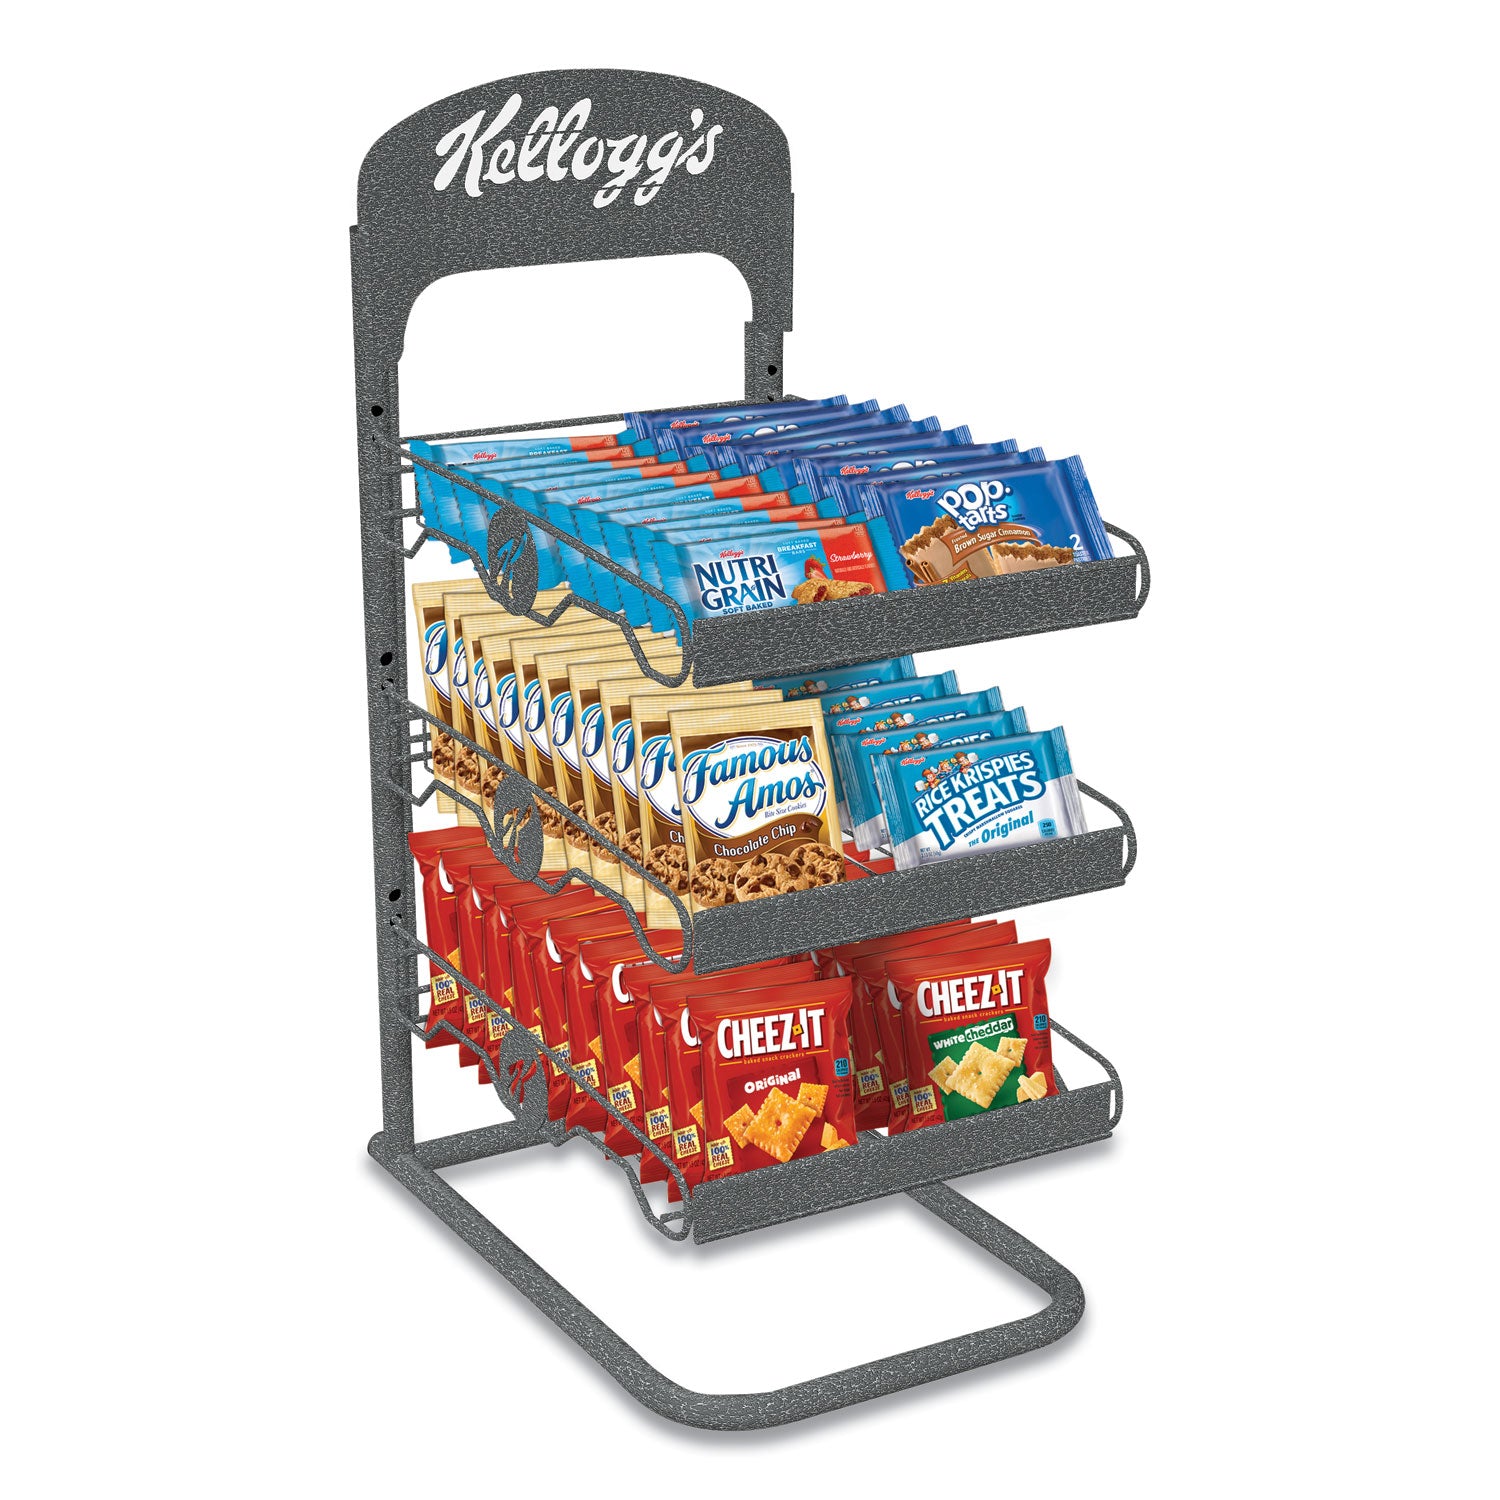 breakroom-solution-rack-with-kelloggs-snack-products-2638l-x-185w-x-125h_keb12021 - 1